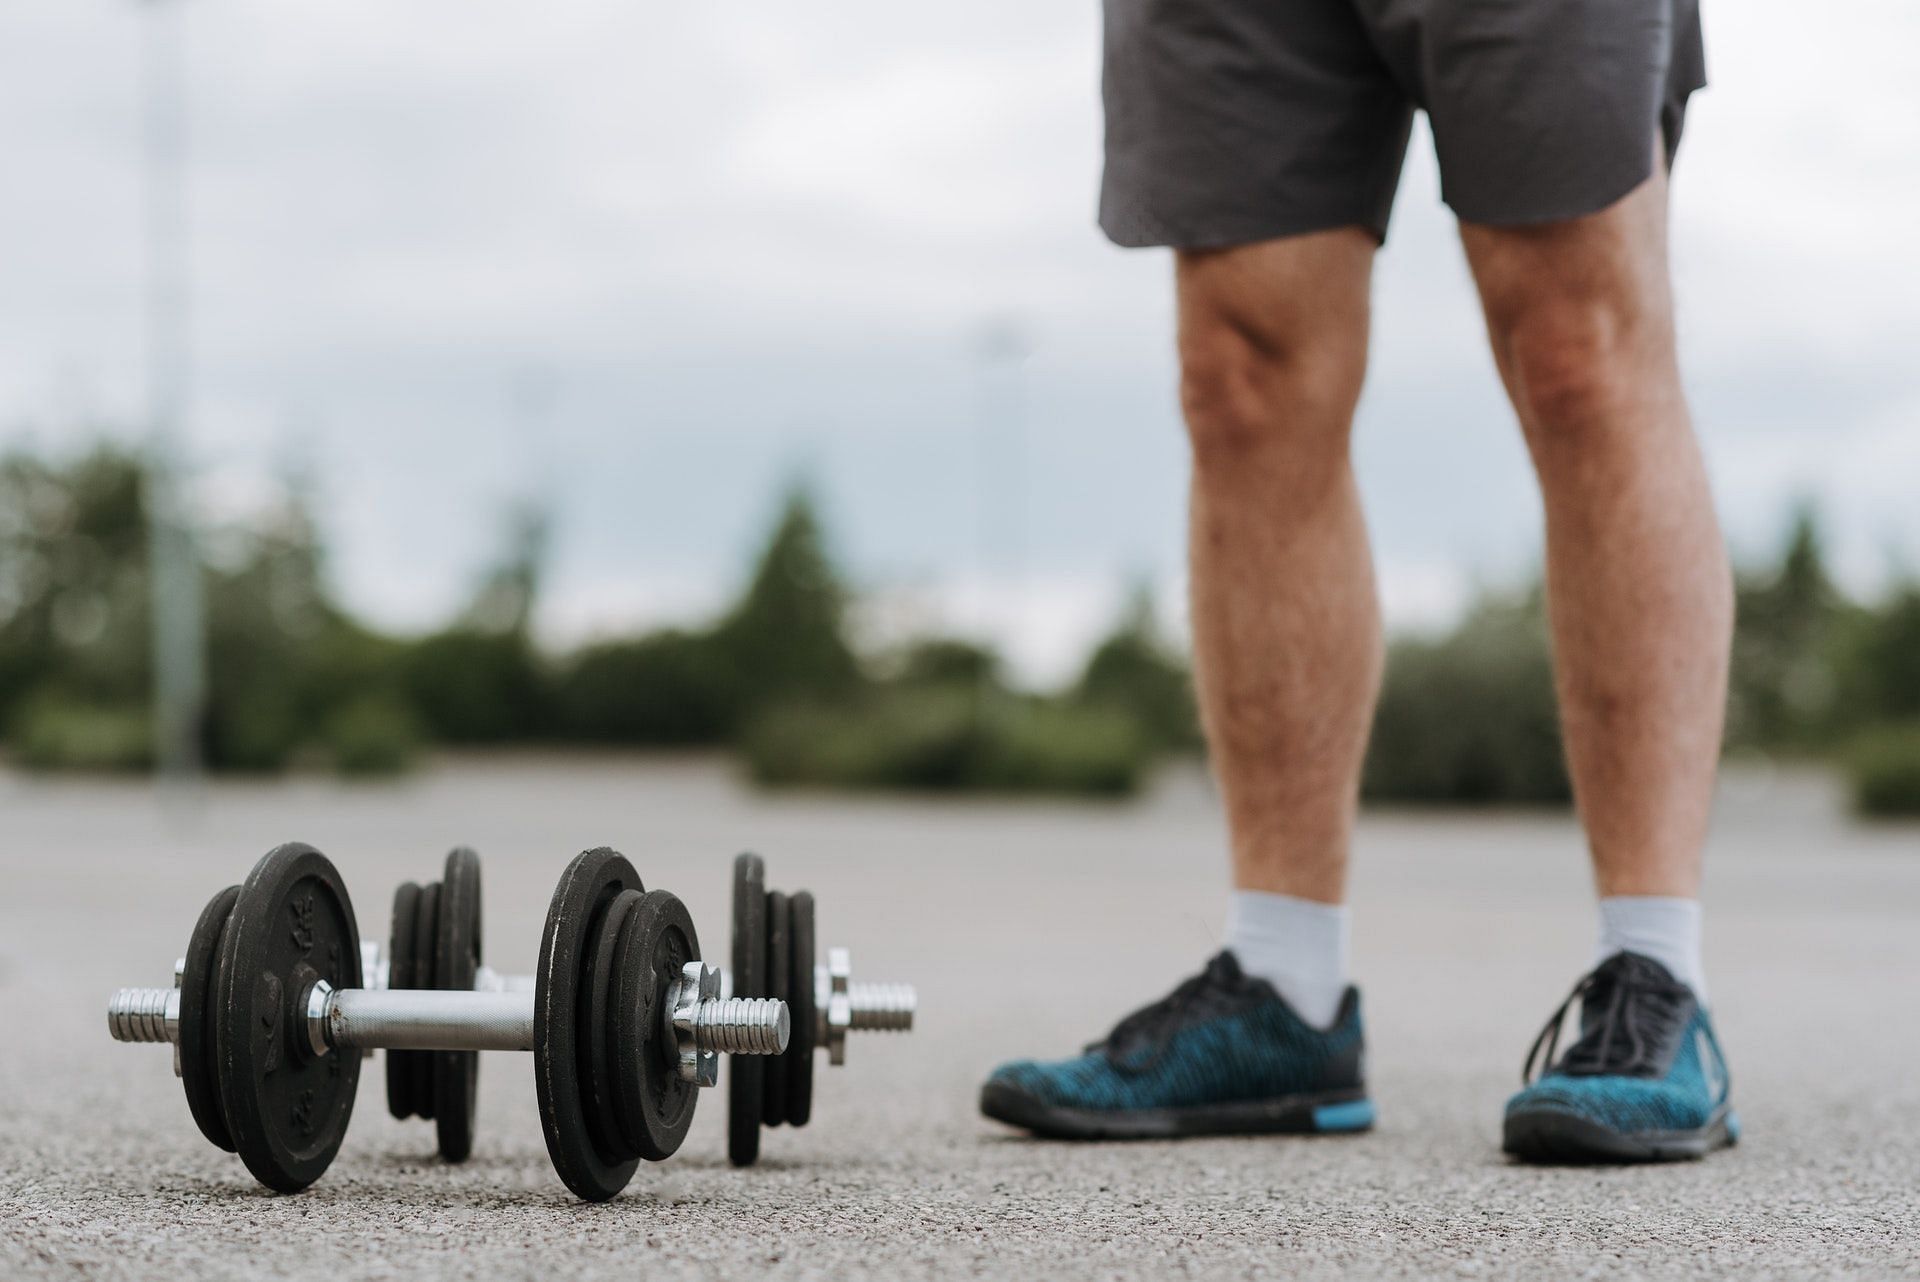 Cardio workouts make your legs stronger. (Photo by Anete Lusina via pexels)